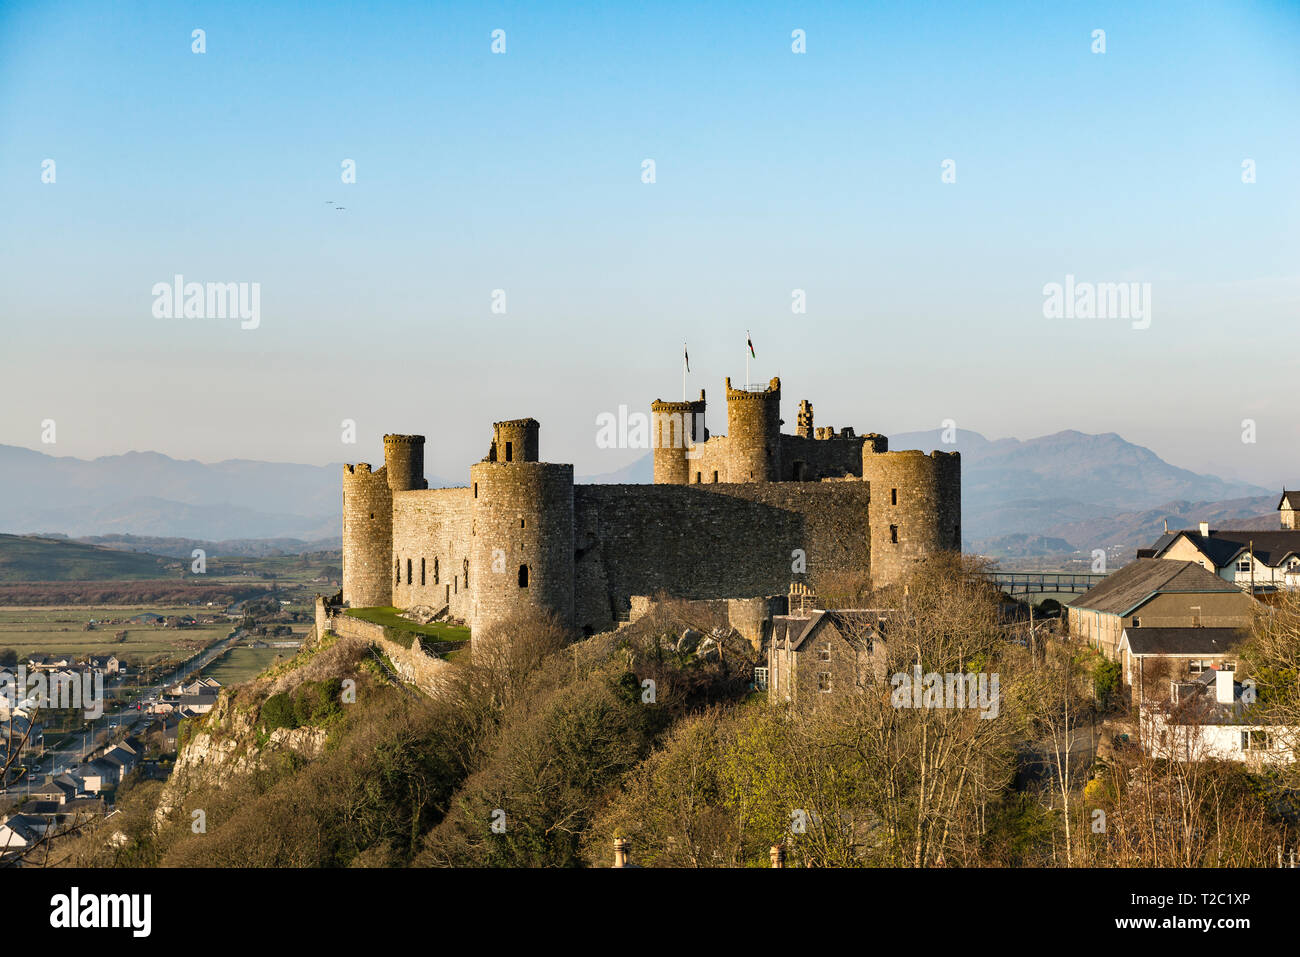 Harlech Castle, Gwynedd, north Wales, UK. It was built by King Edward I in 1282, and overlooks the small town of Harlech and the Irish Sea Stock Photo